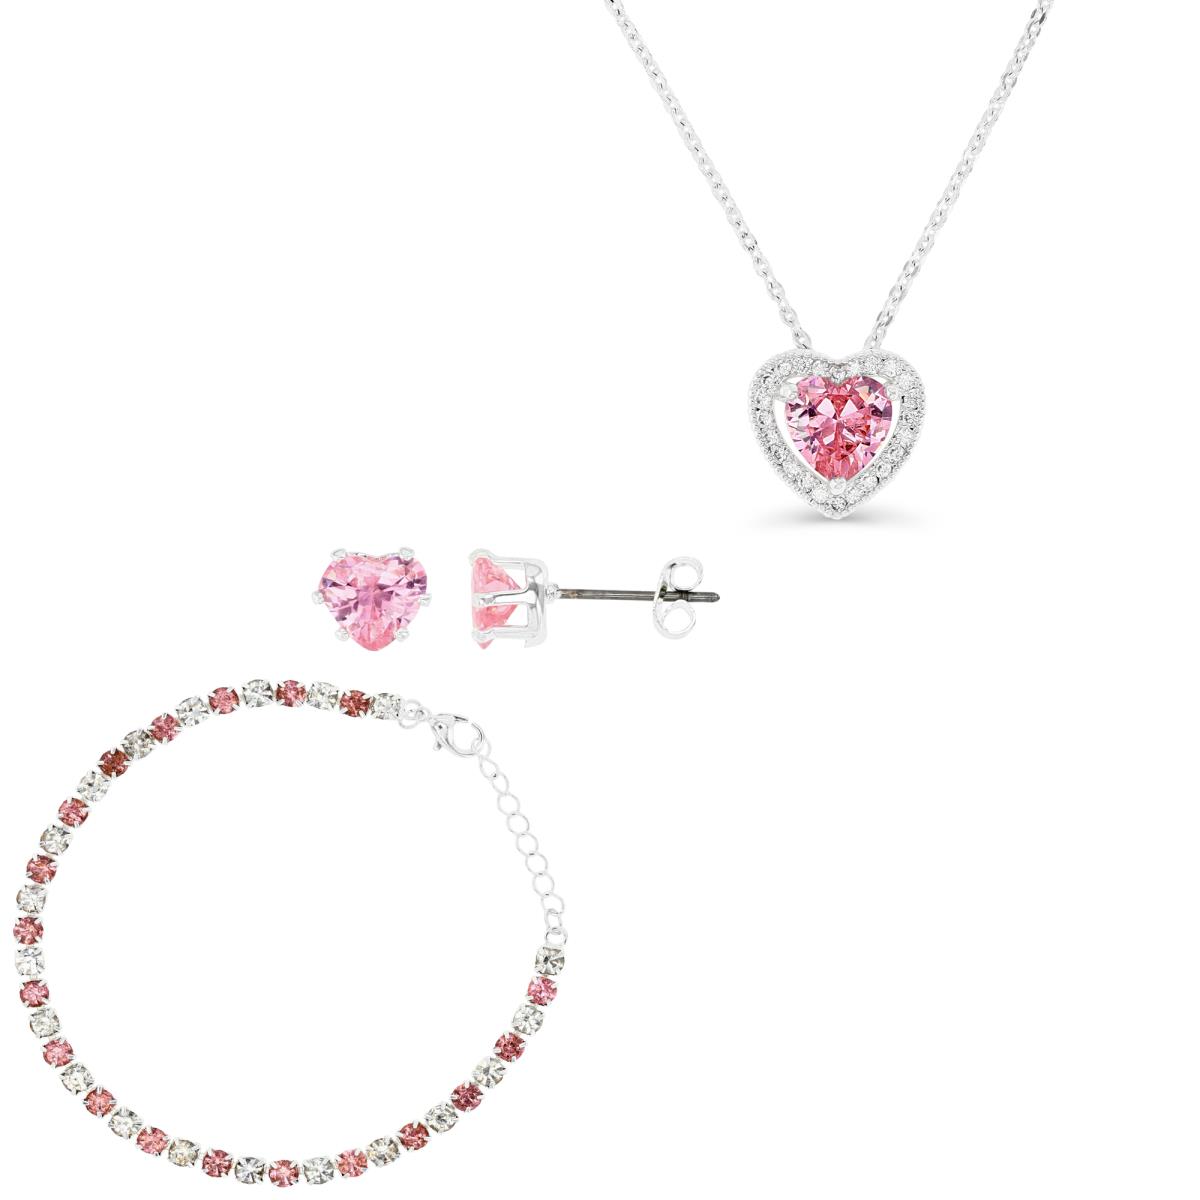 Platinum Plated Brass Silver Plated & Pink/White CZ 7+1" Tennis Bracelet, 6MM Heart Stud Earrings and 16+2" Halo Heart Necklace Set